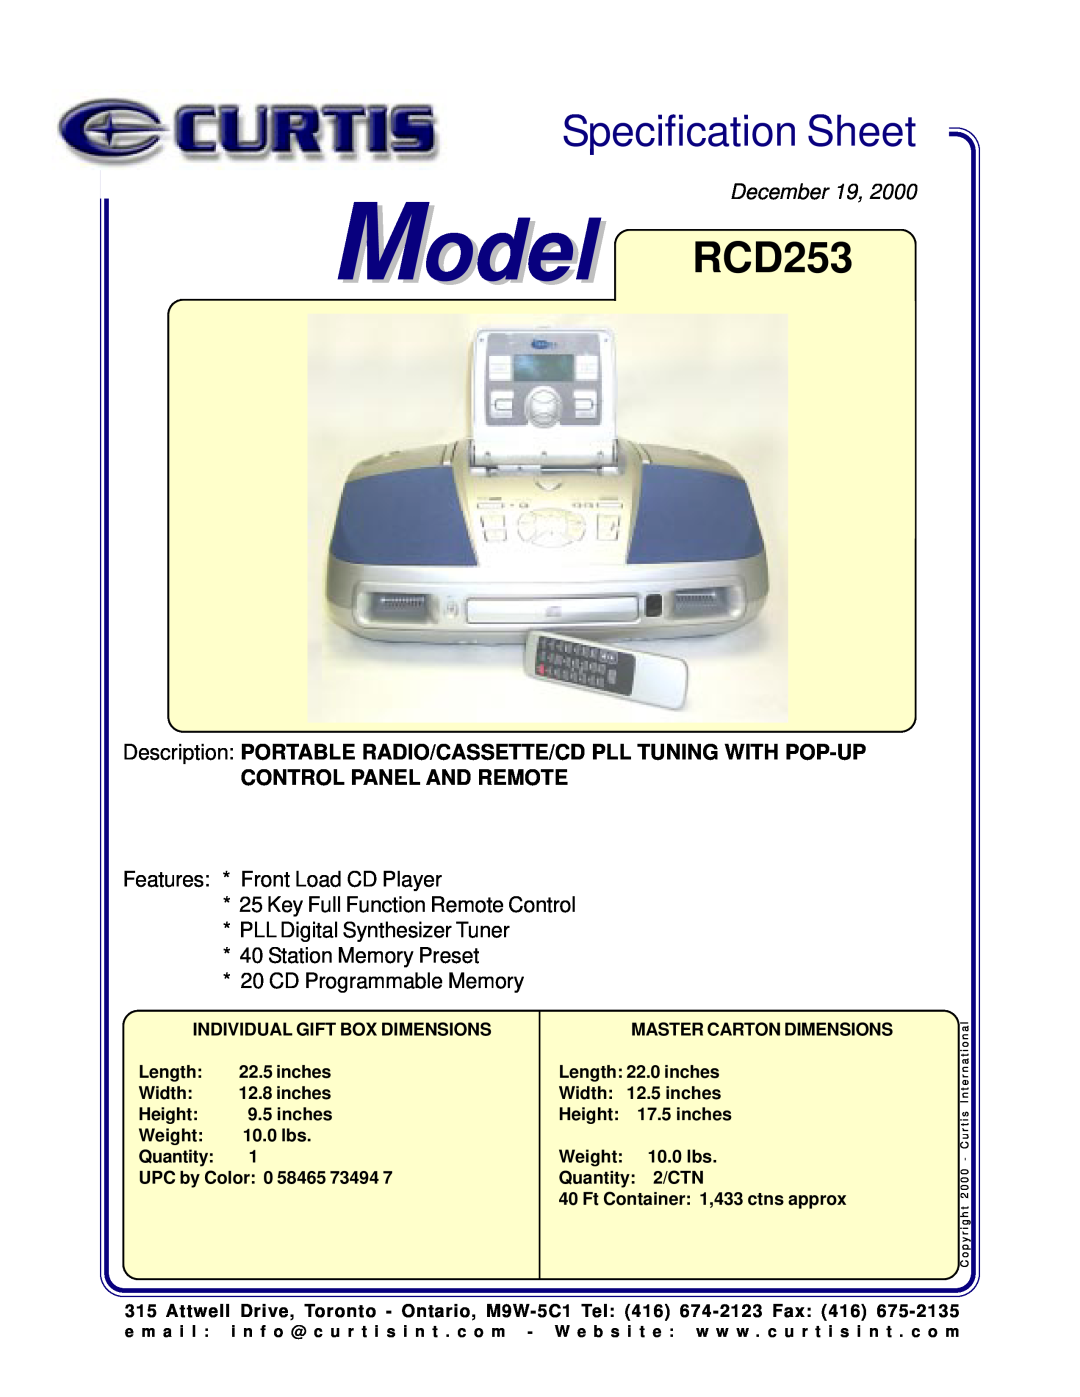 Curtis specifications Specification Sheet, Model RCD253, December 19, Place Image Here, Control Panel And Remote 